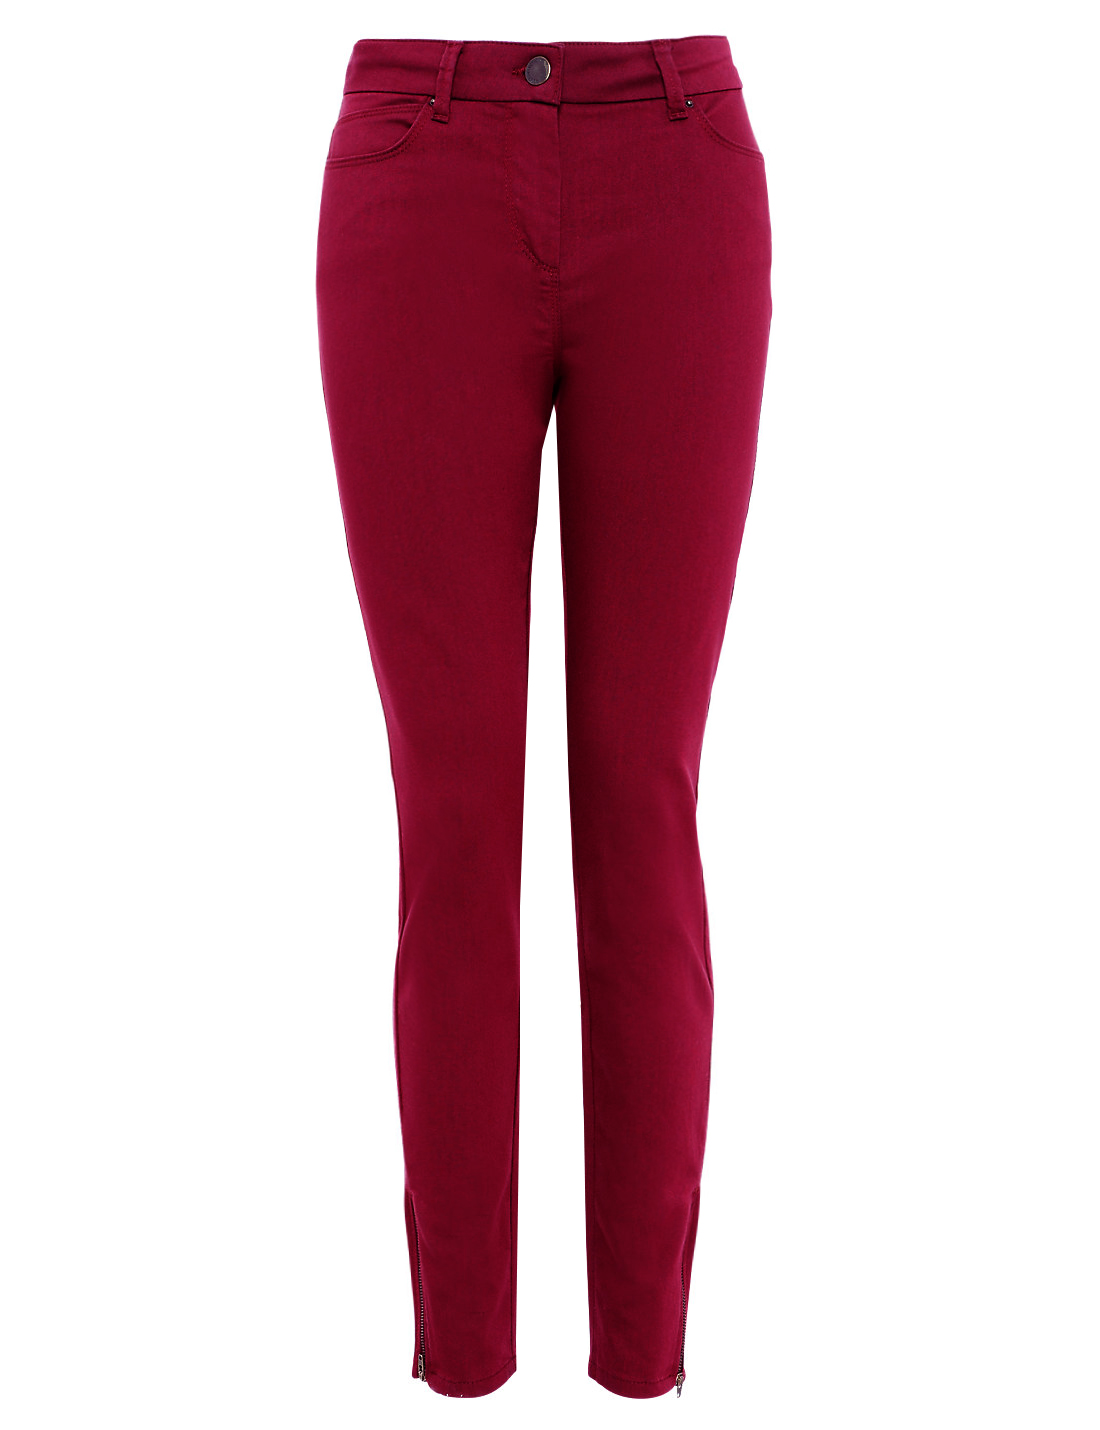 Marks and Spencer - - M&5 CRANBERRY Ankle Zipped Denim Jeggings - Size 12